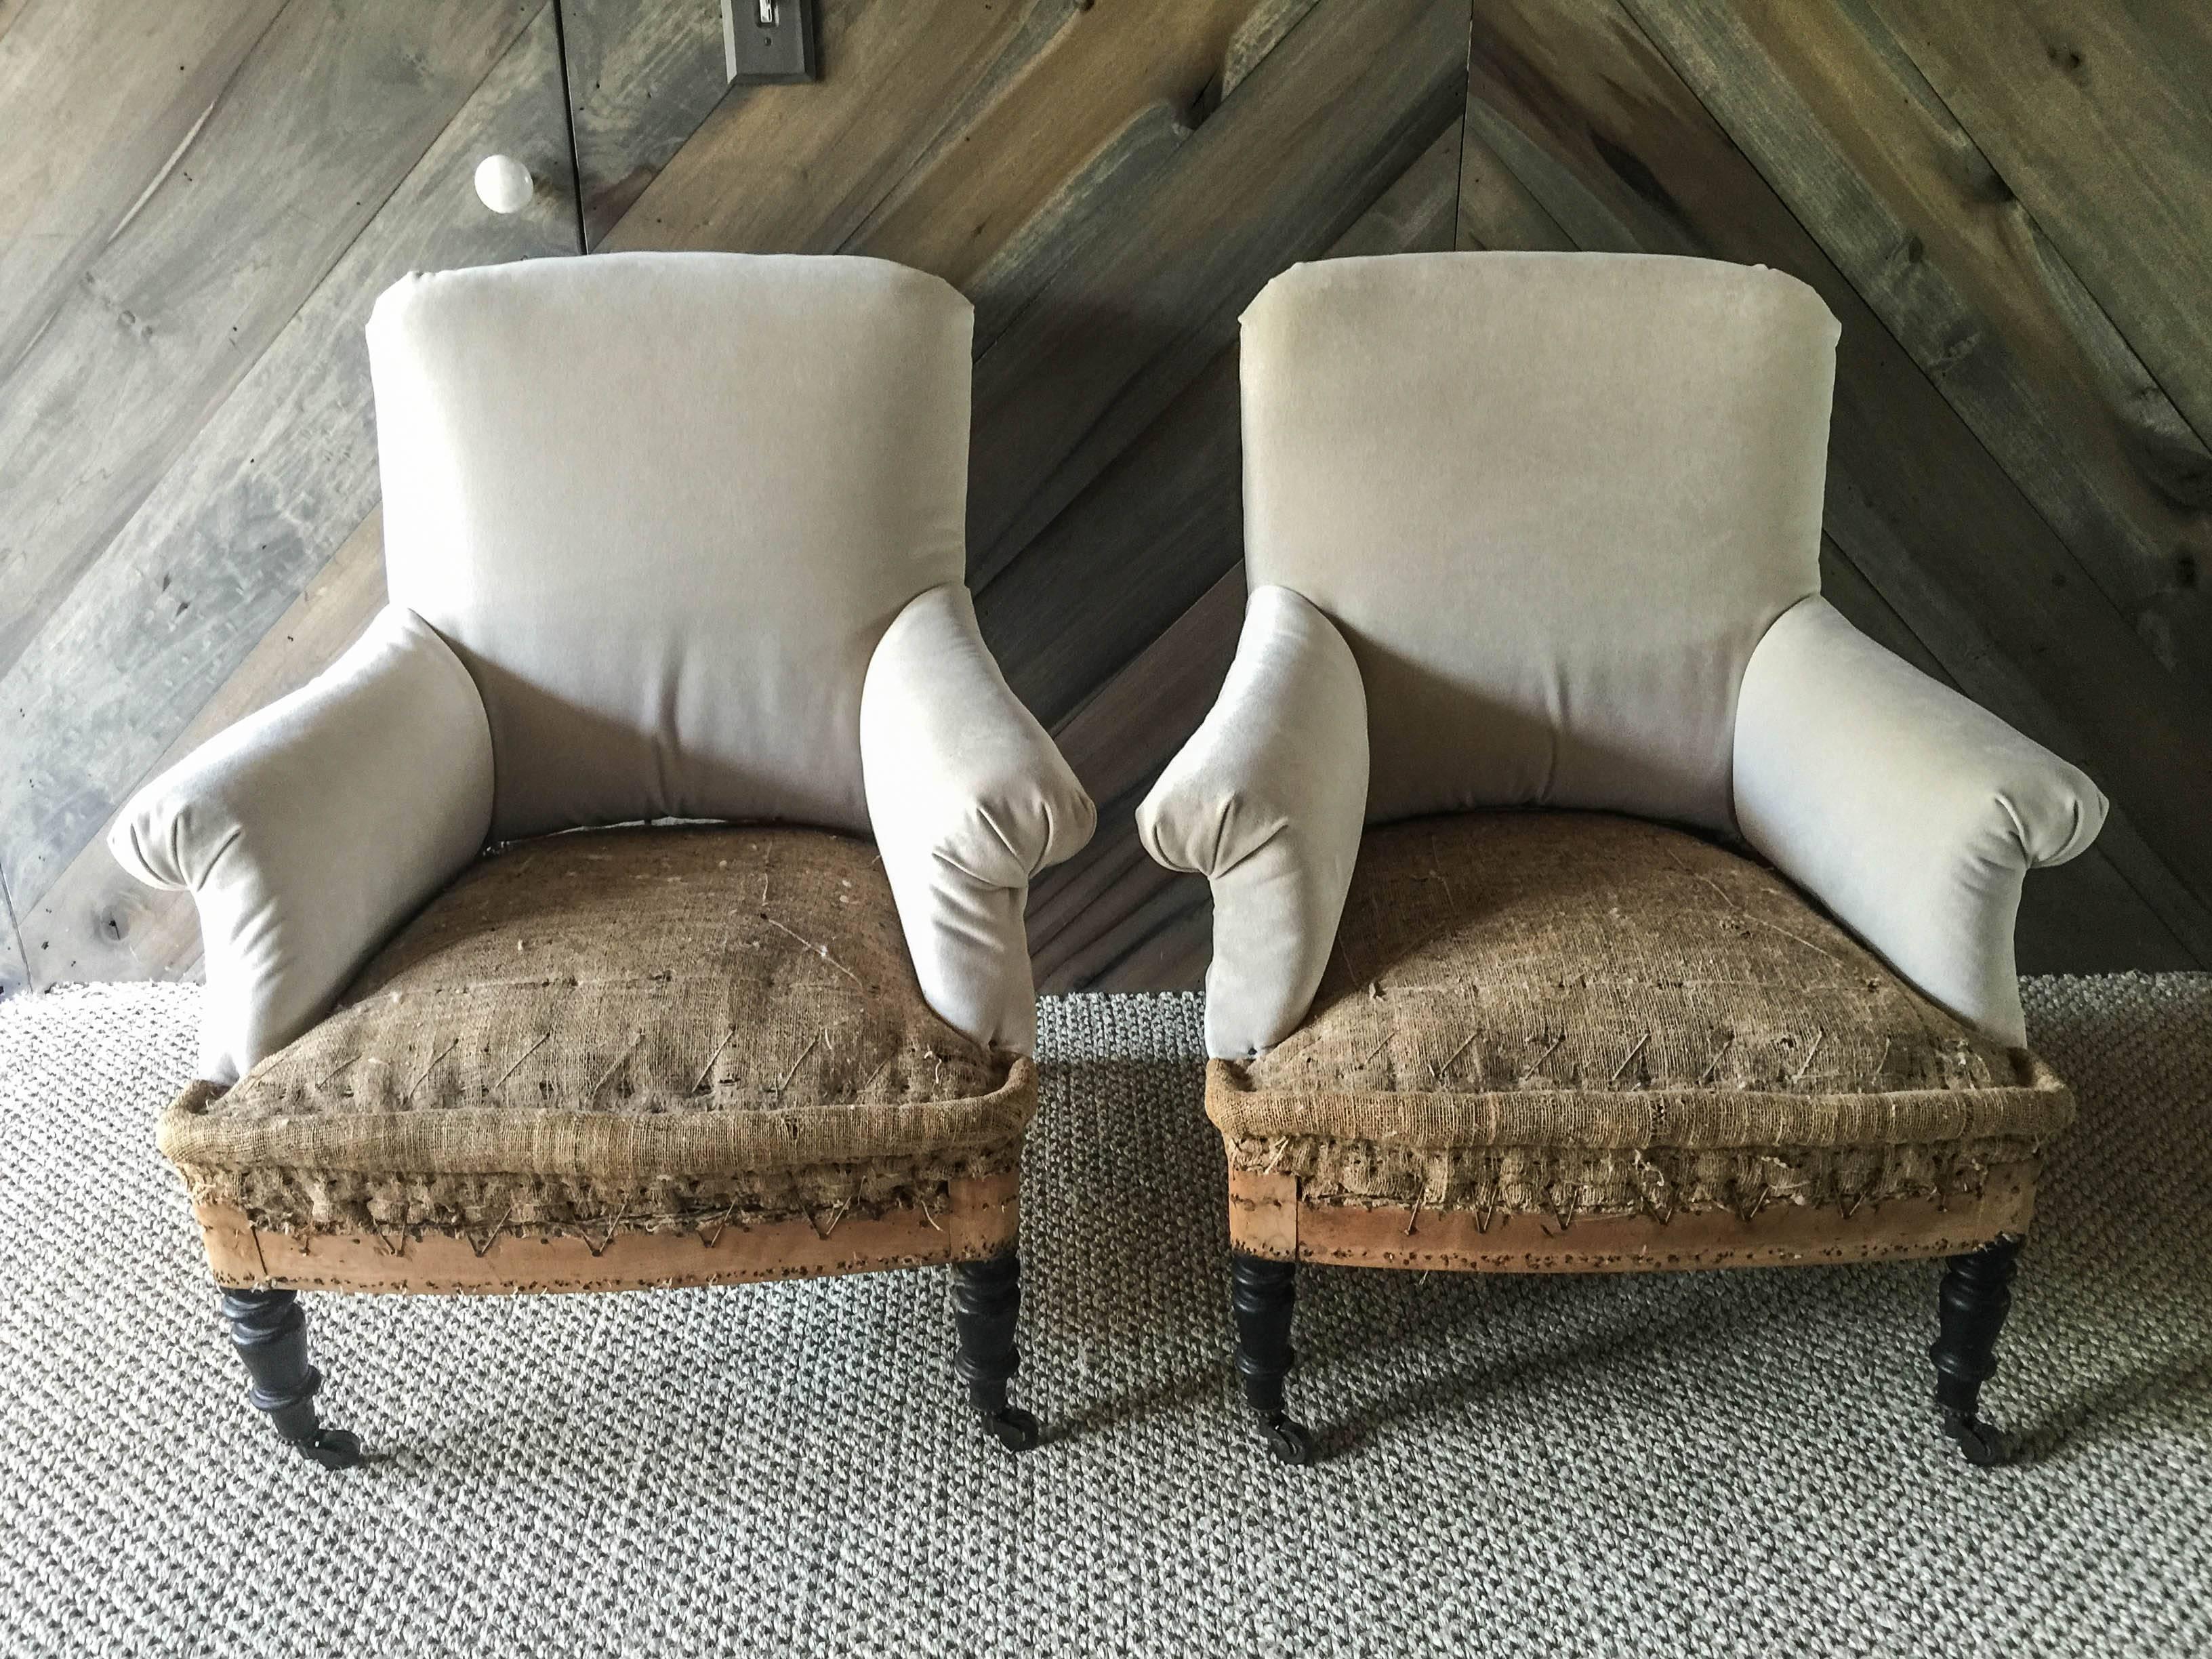 Pair of French salon chairs newly upholstered in cement cotton velvet leaving the sides and back uncovered to highlight authenticity and age. Ebonized turned legs with brass casters.